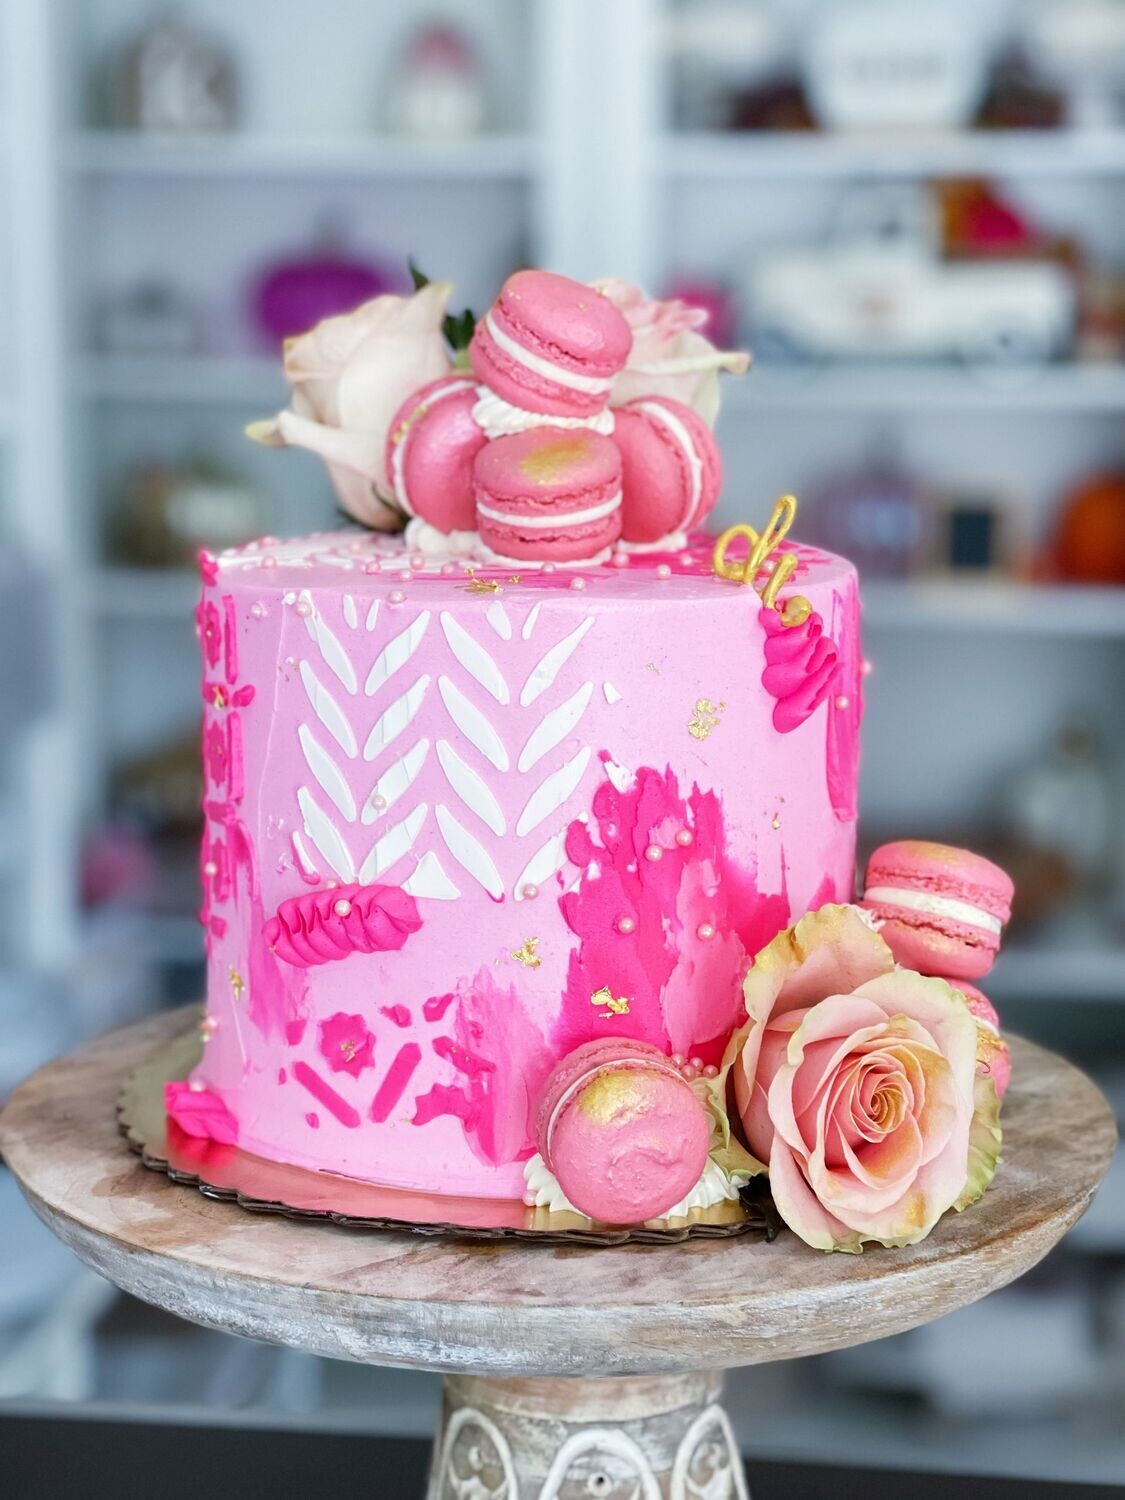 The Pretty in Pink Cake